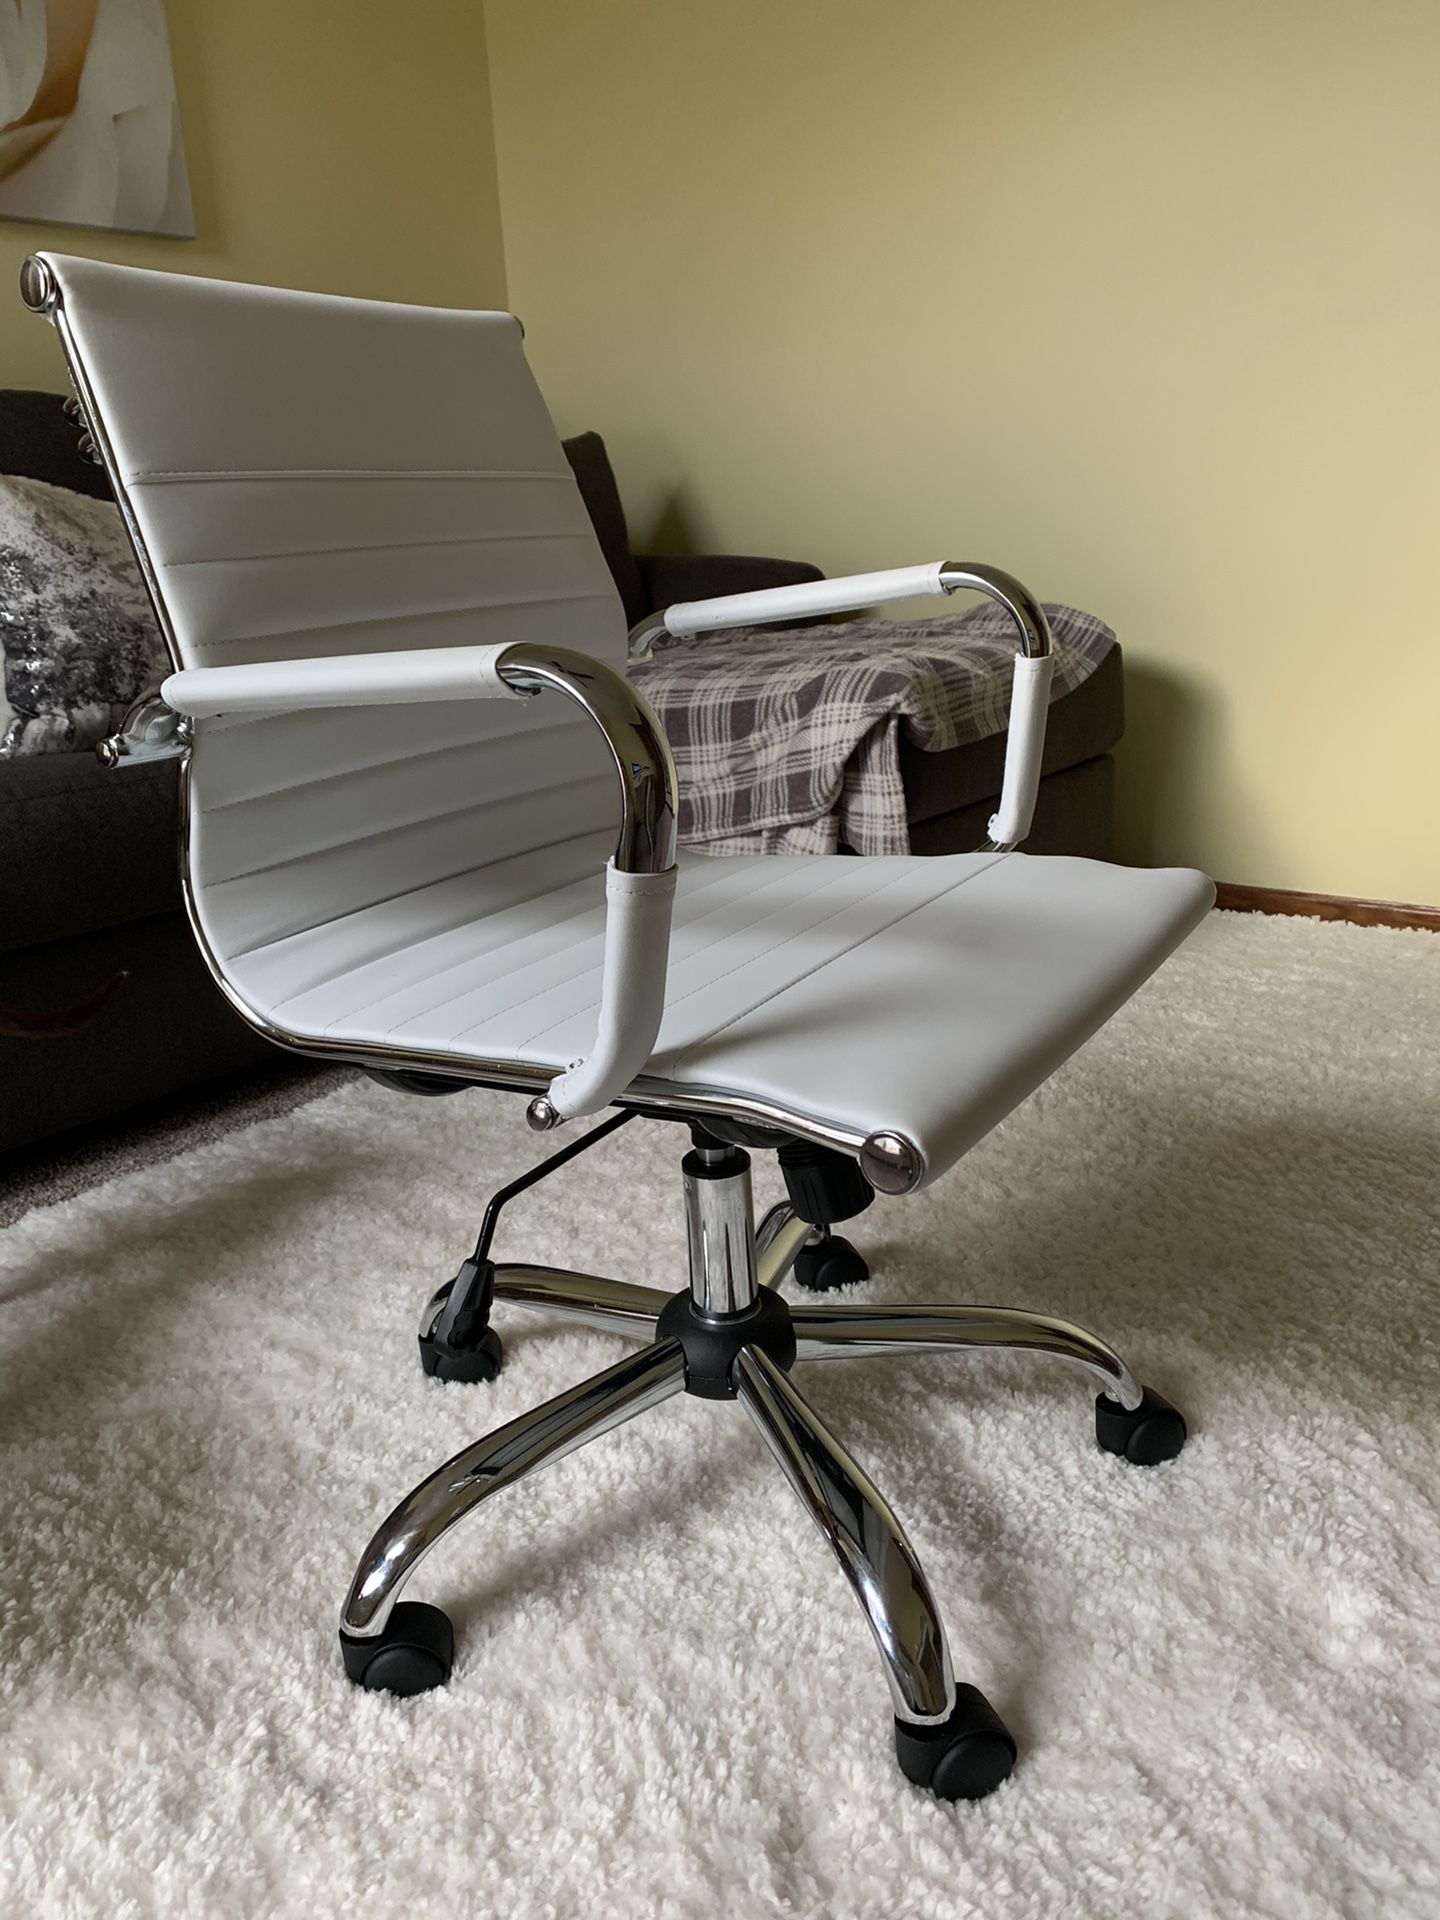 Brand new office chair and desk - will sell separate